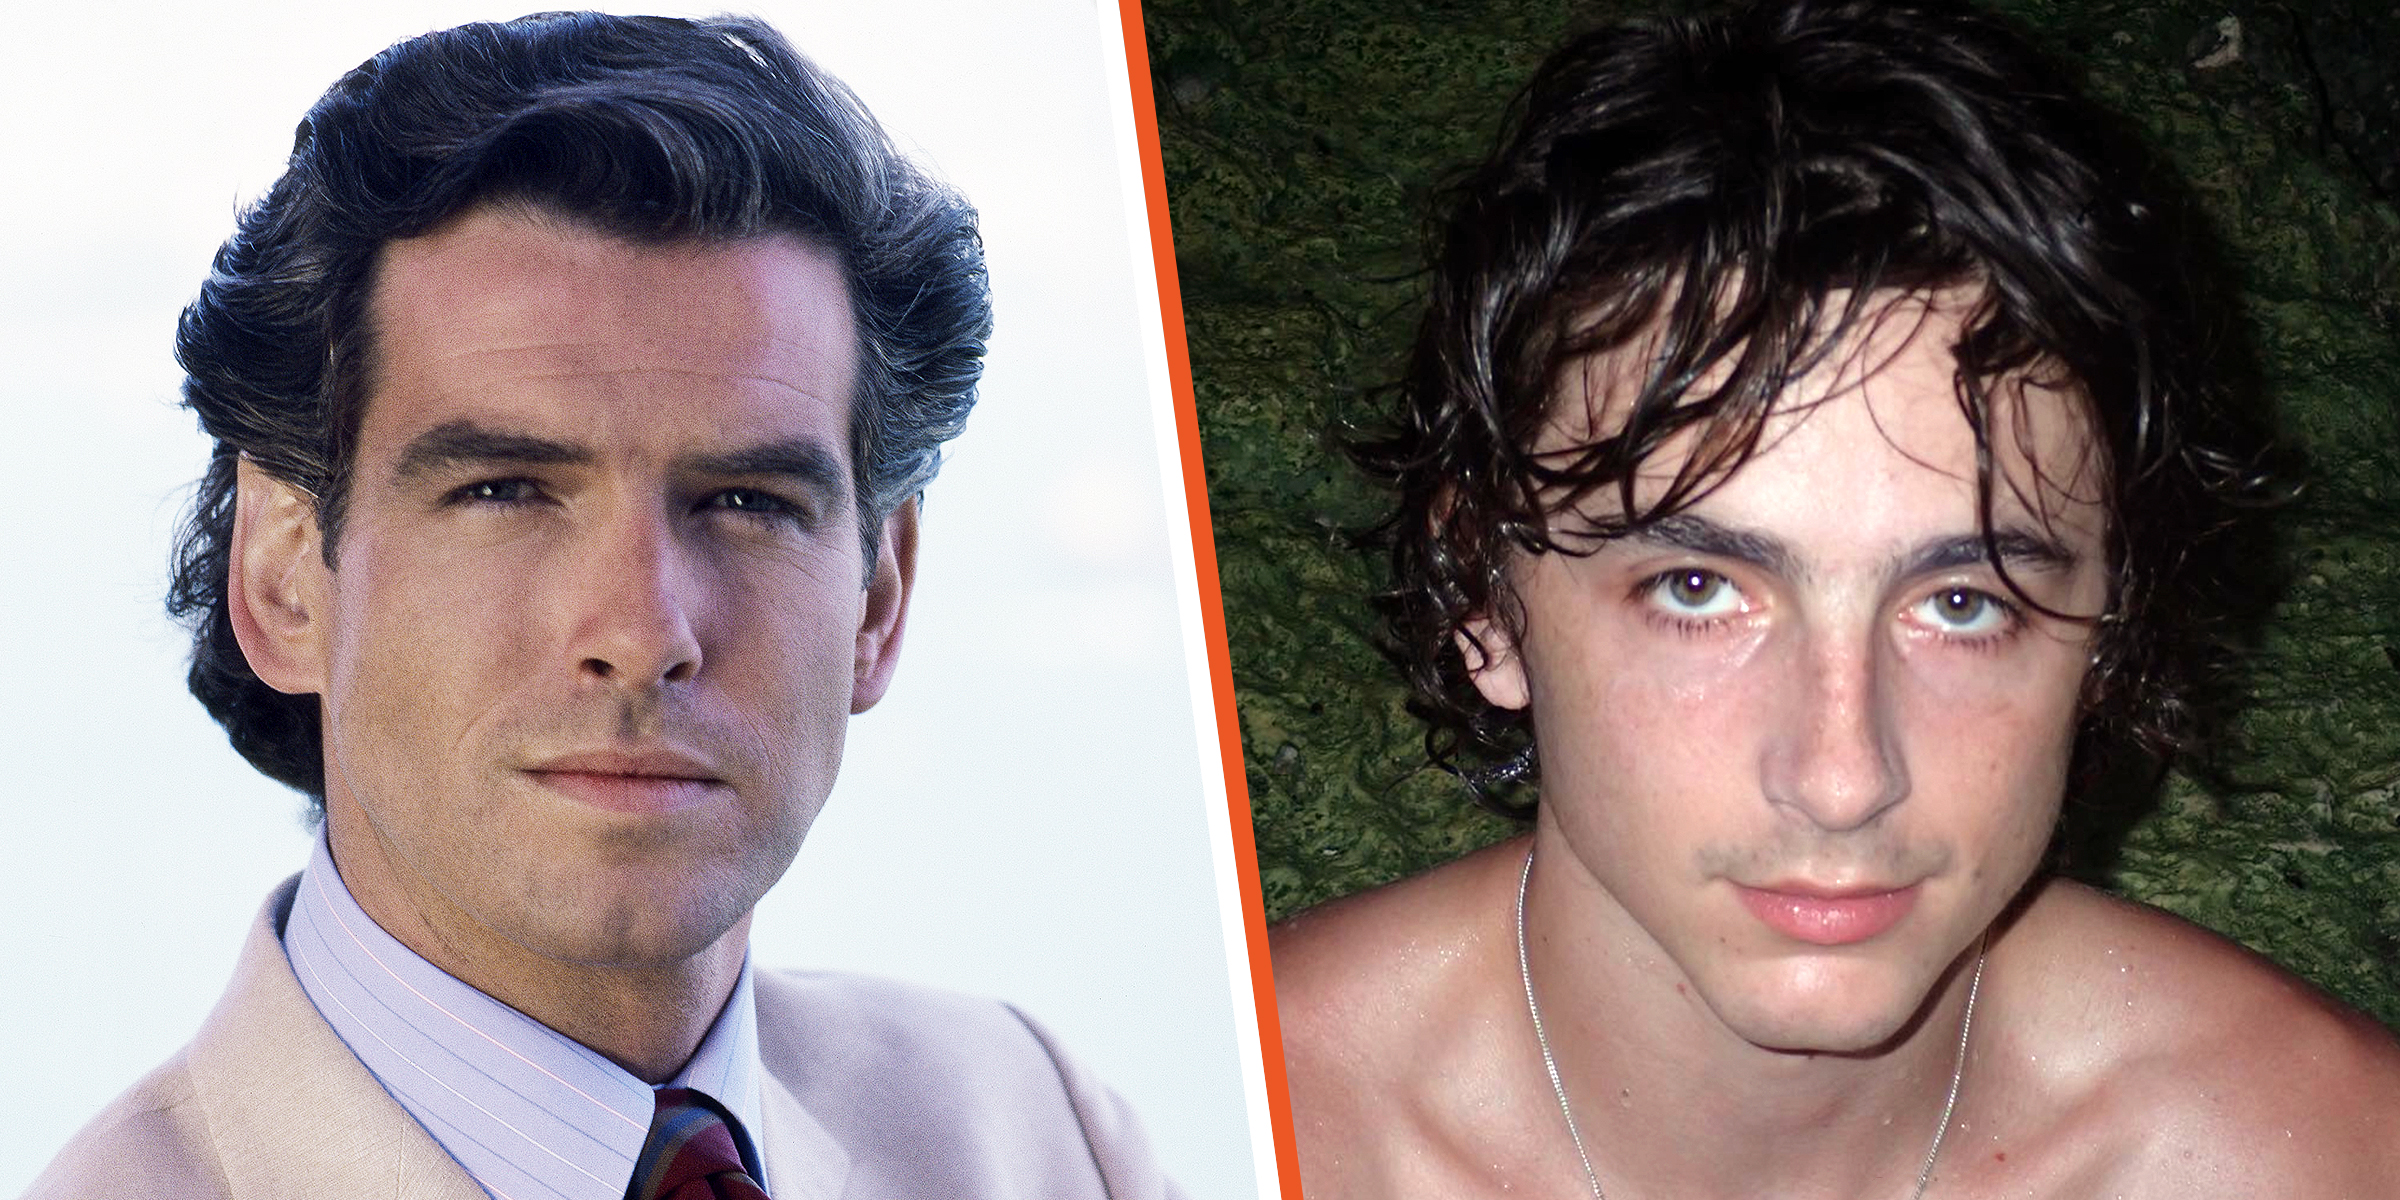 Pierce Brosnan [Left], Timothy Chalamet [Right] | Source: Getty Images